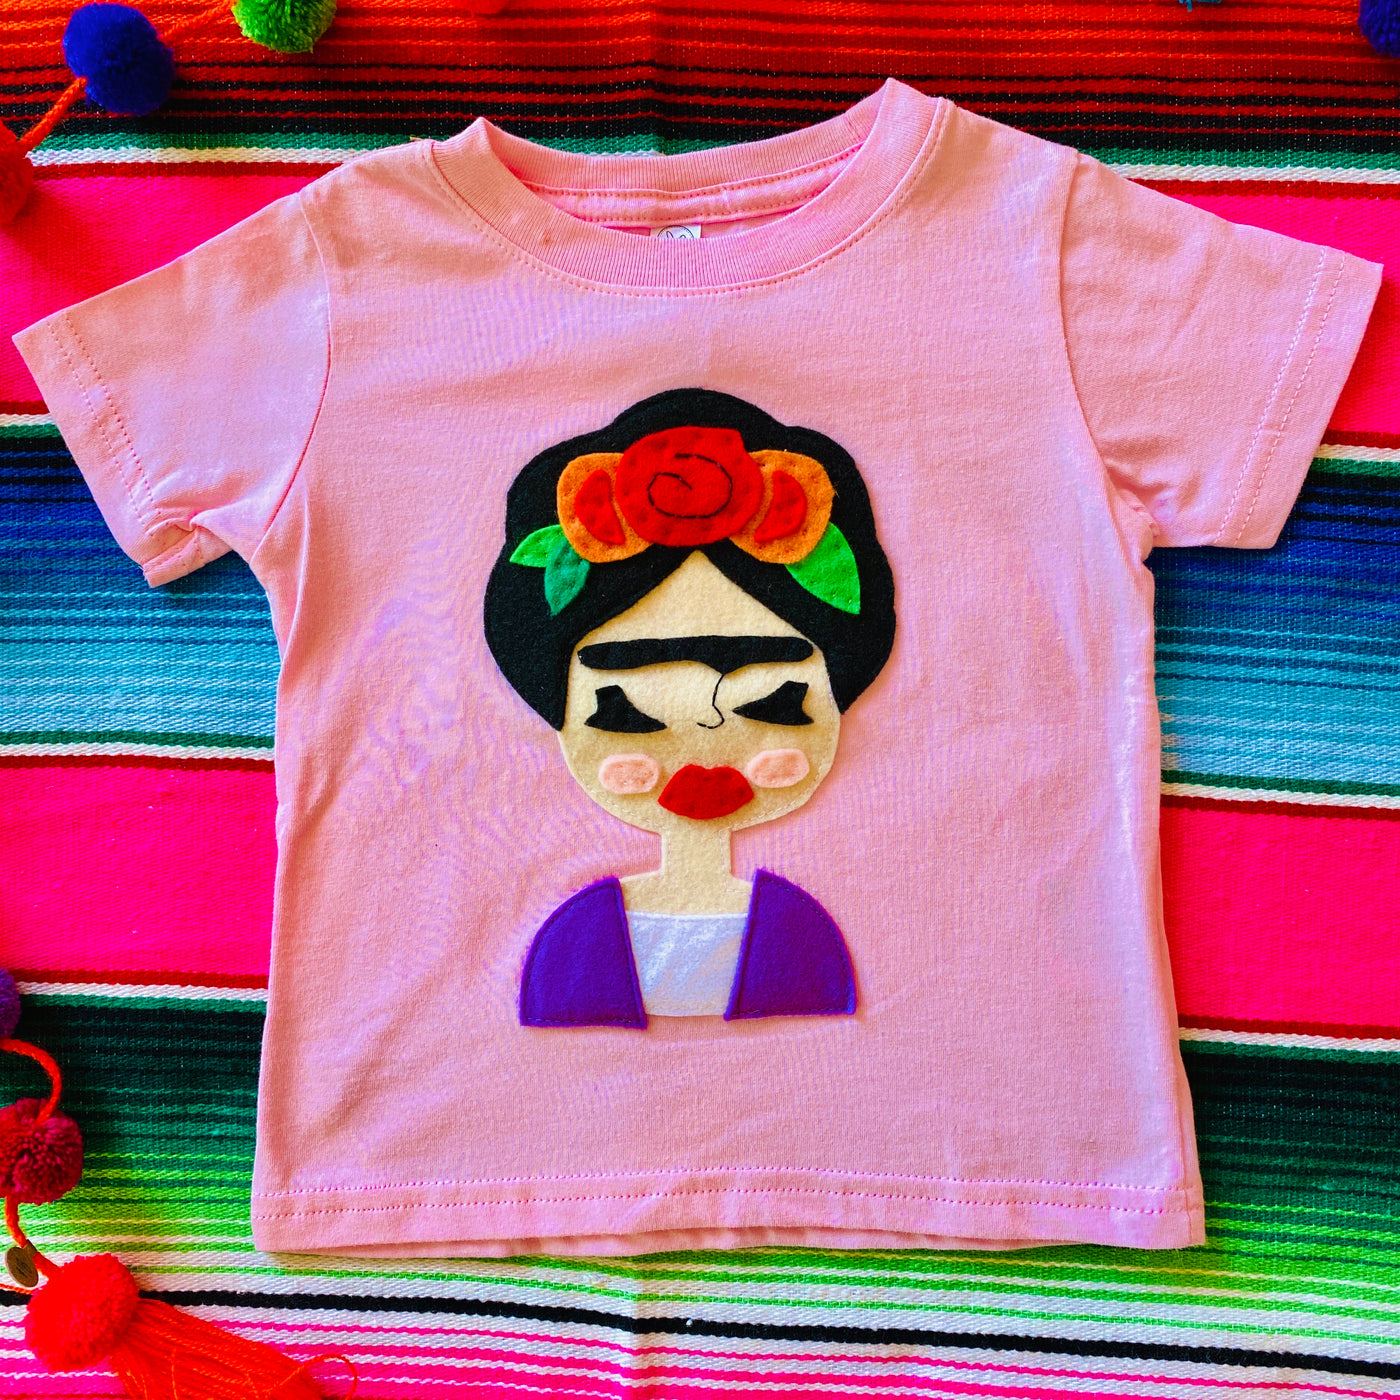 Top view of hand-stitched Frida kid's pink t-shirt. T-shirt pictured on top of serape blanket.